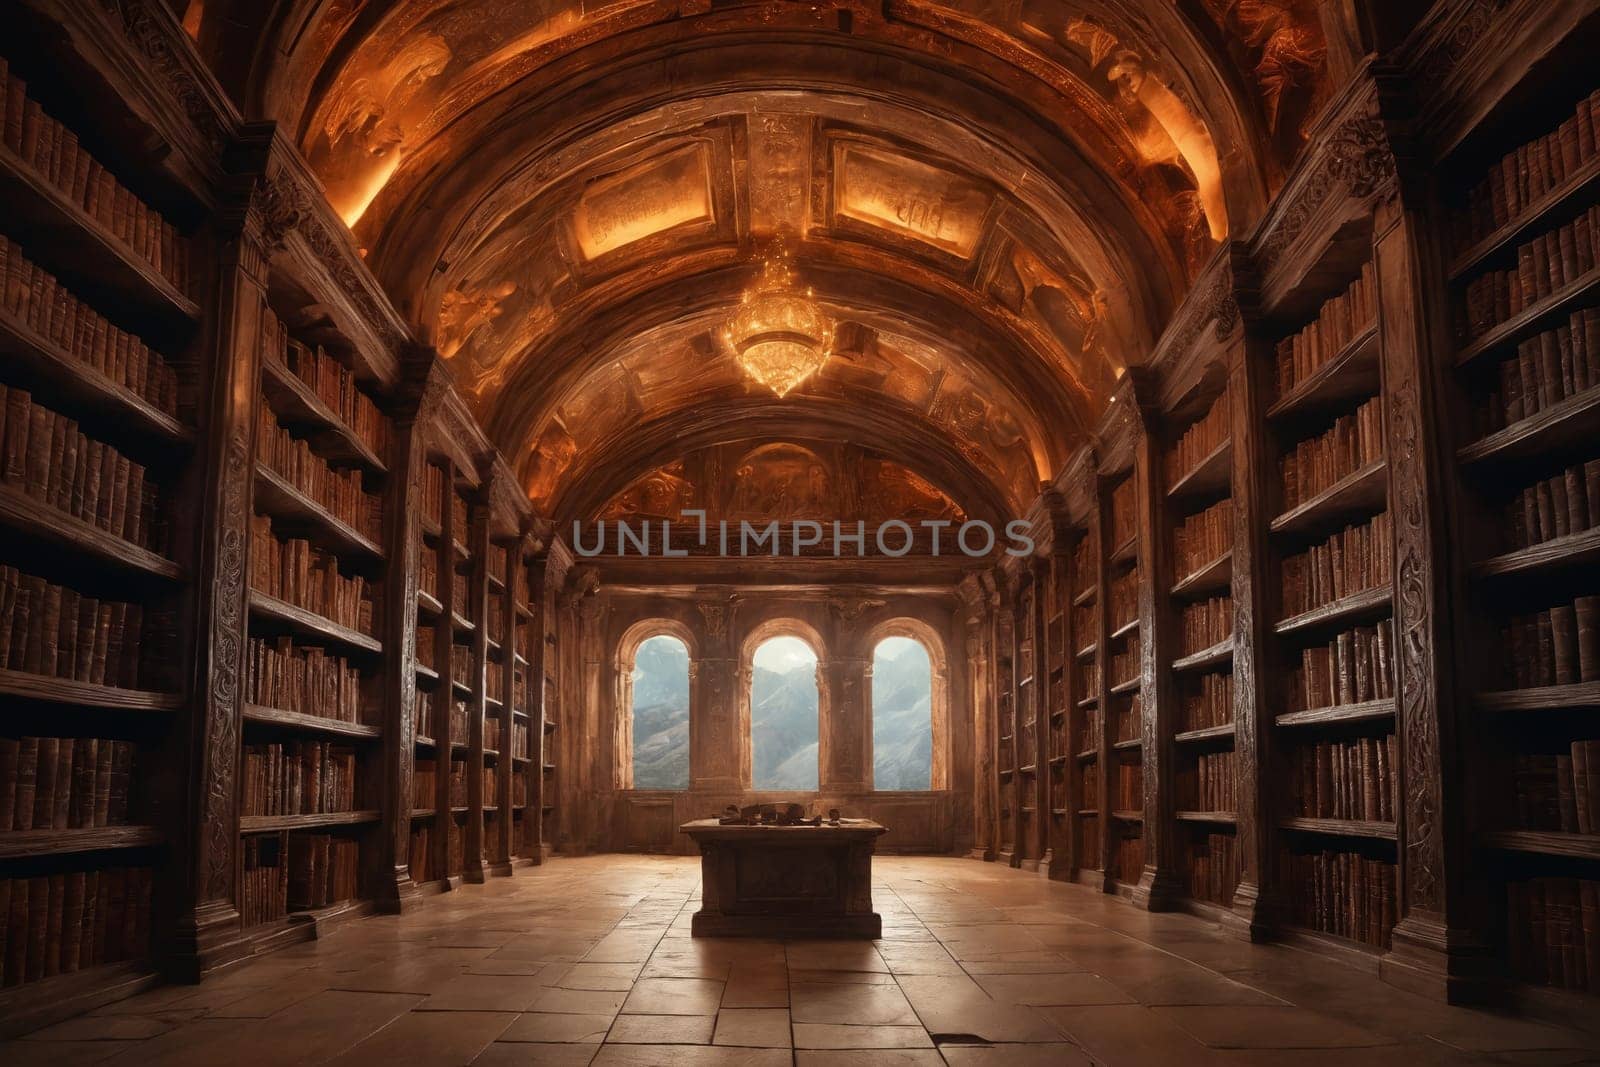 This image takes you to an imposing library space with its tall wooden bookshelves teeming with old books.